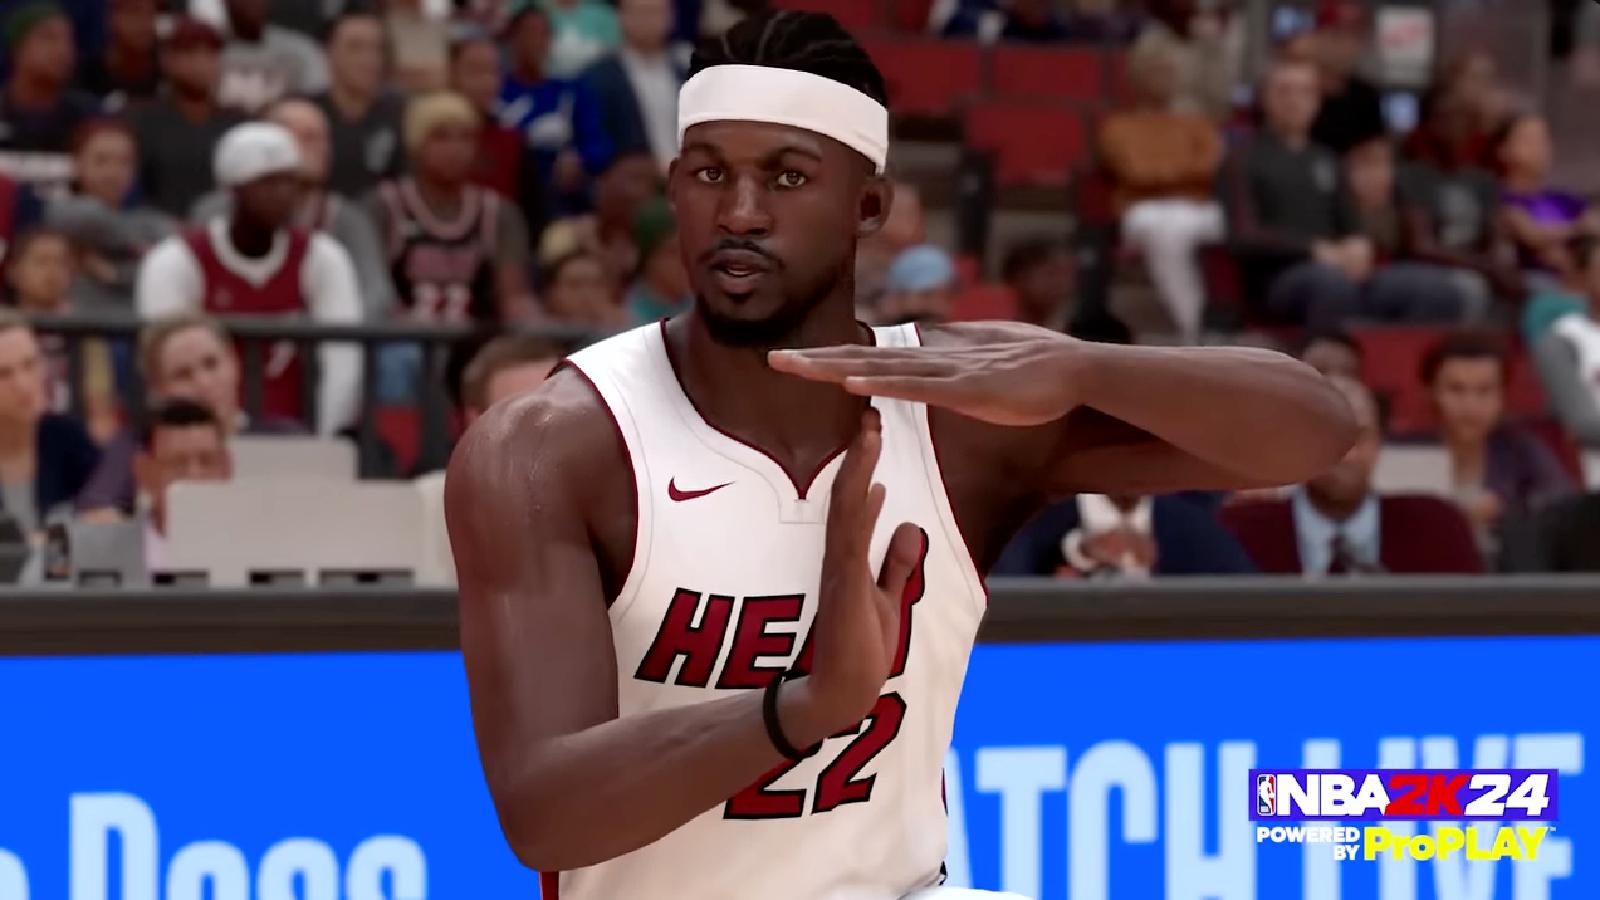 NBA 2K24 is one of the most poorly reviewed games on Steam - Xfire